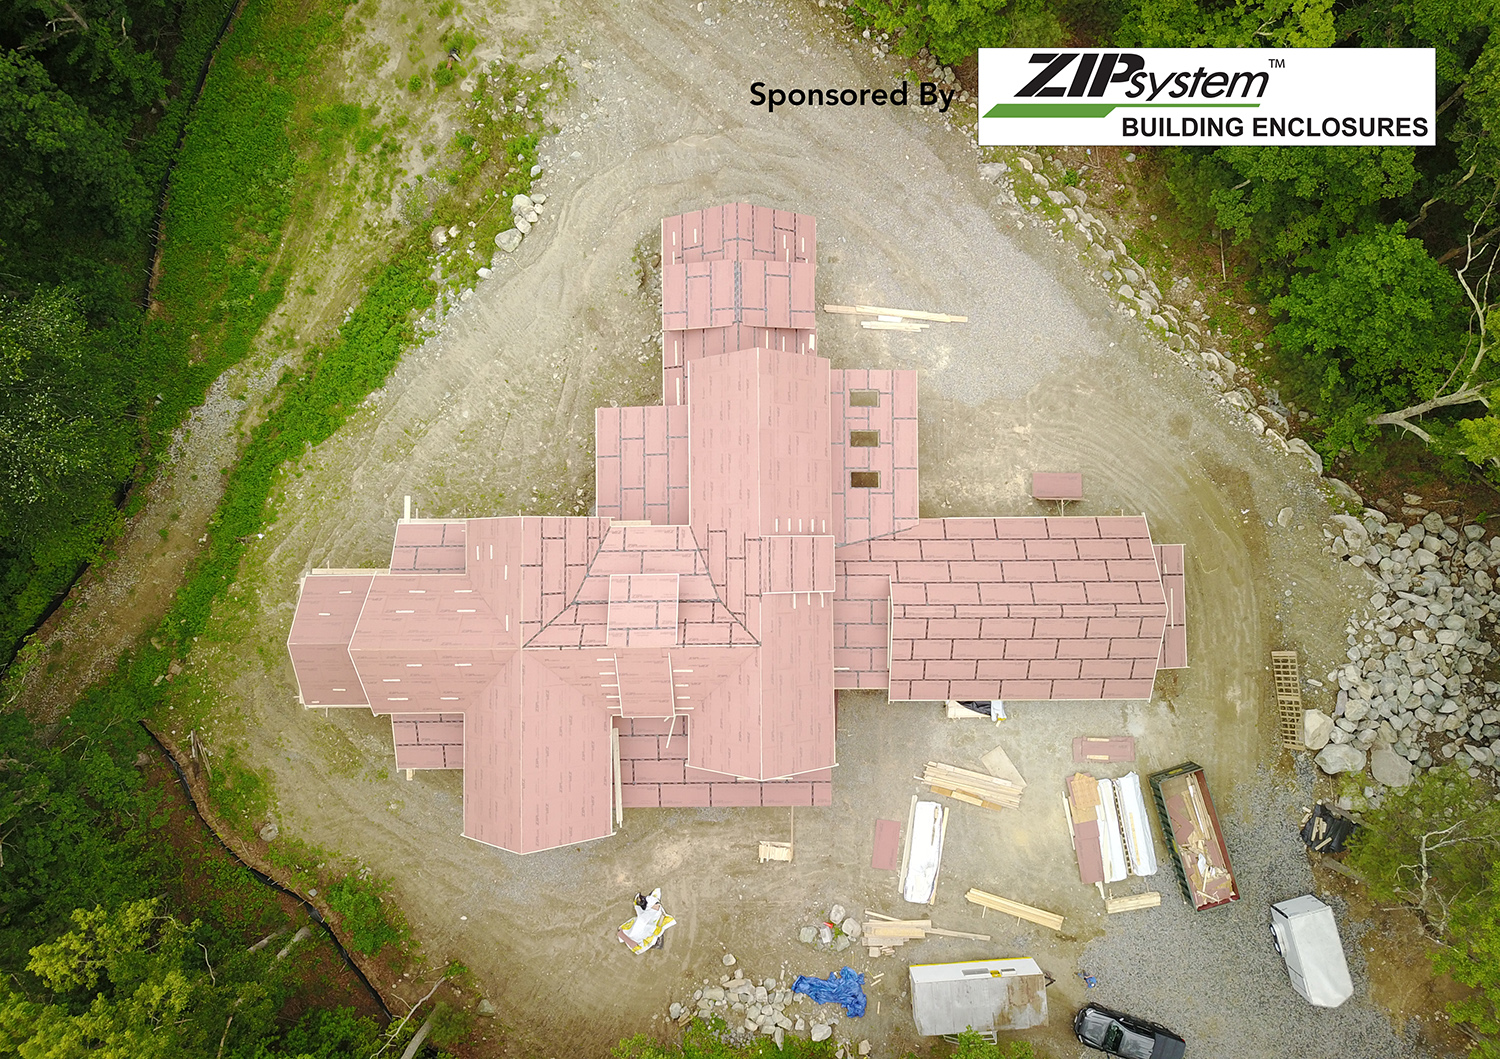 Aerial view of a large house with the ZIP System logo in the corner